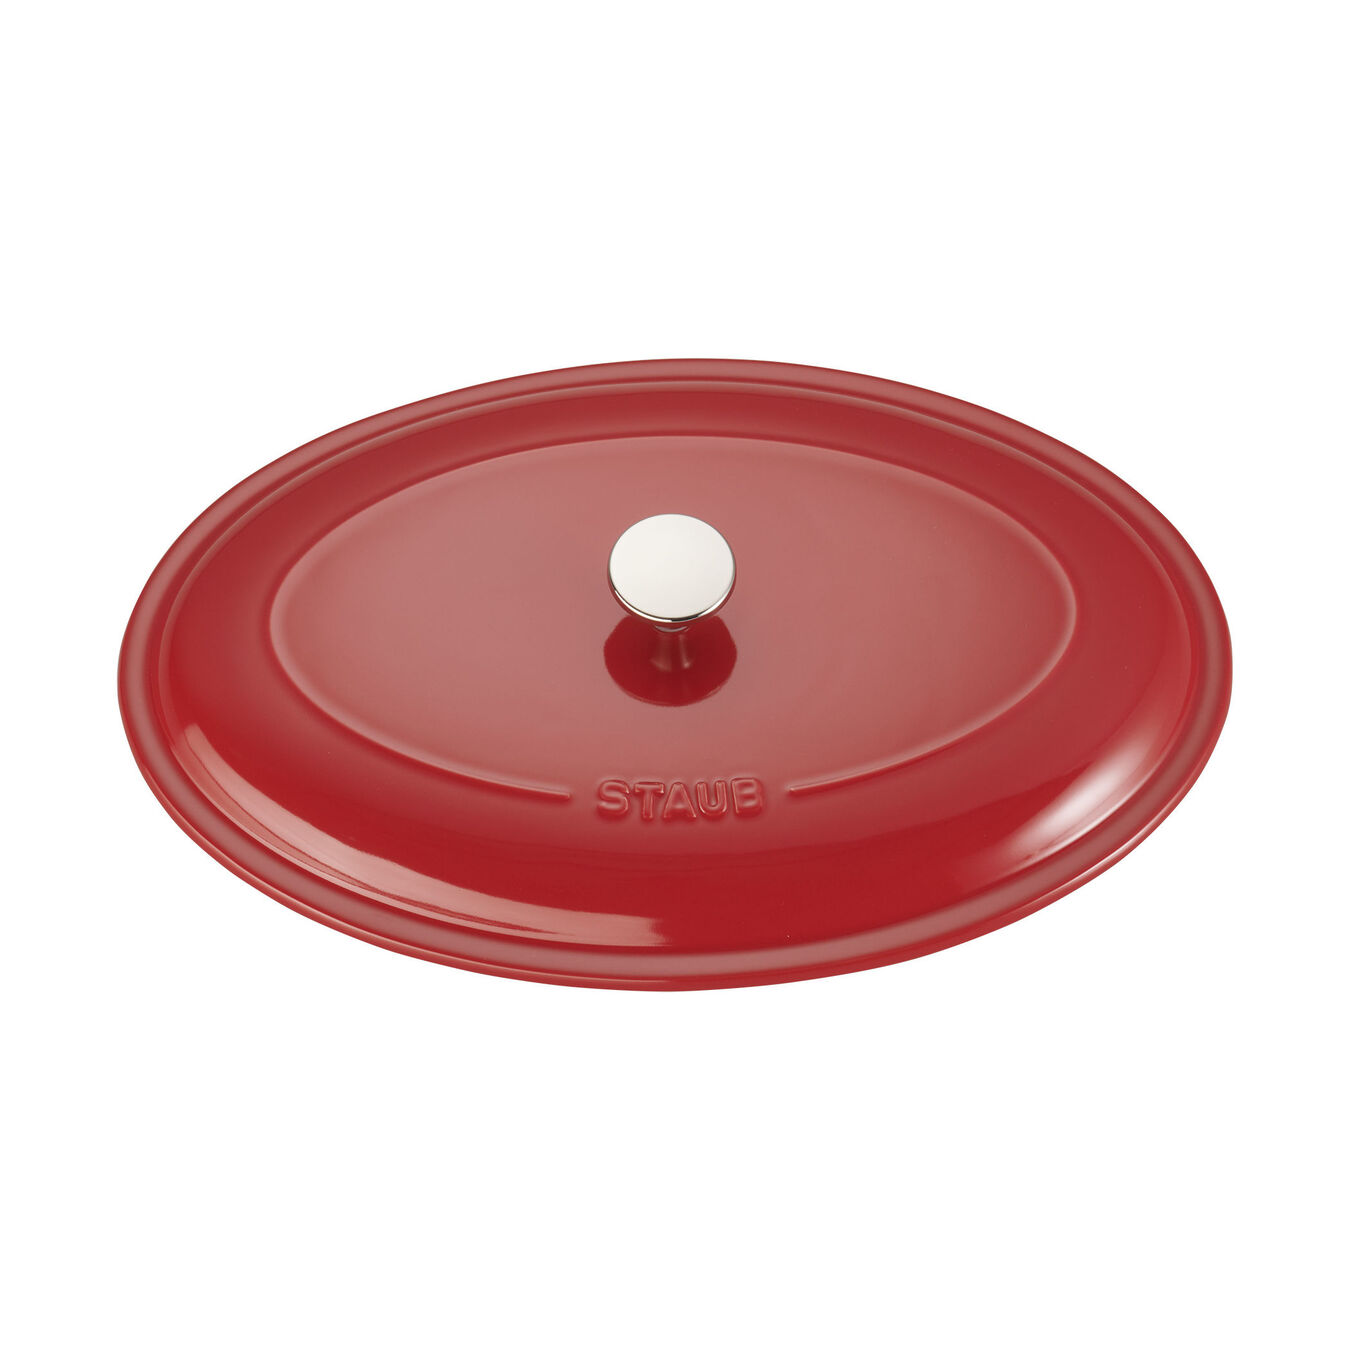  ceramic Special shape bakeware, cherry,,large 4